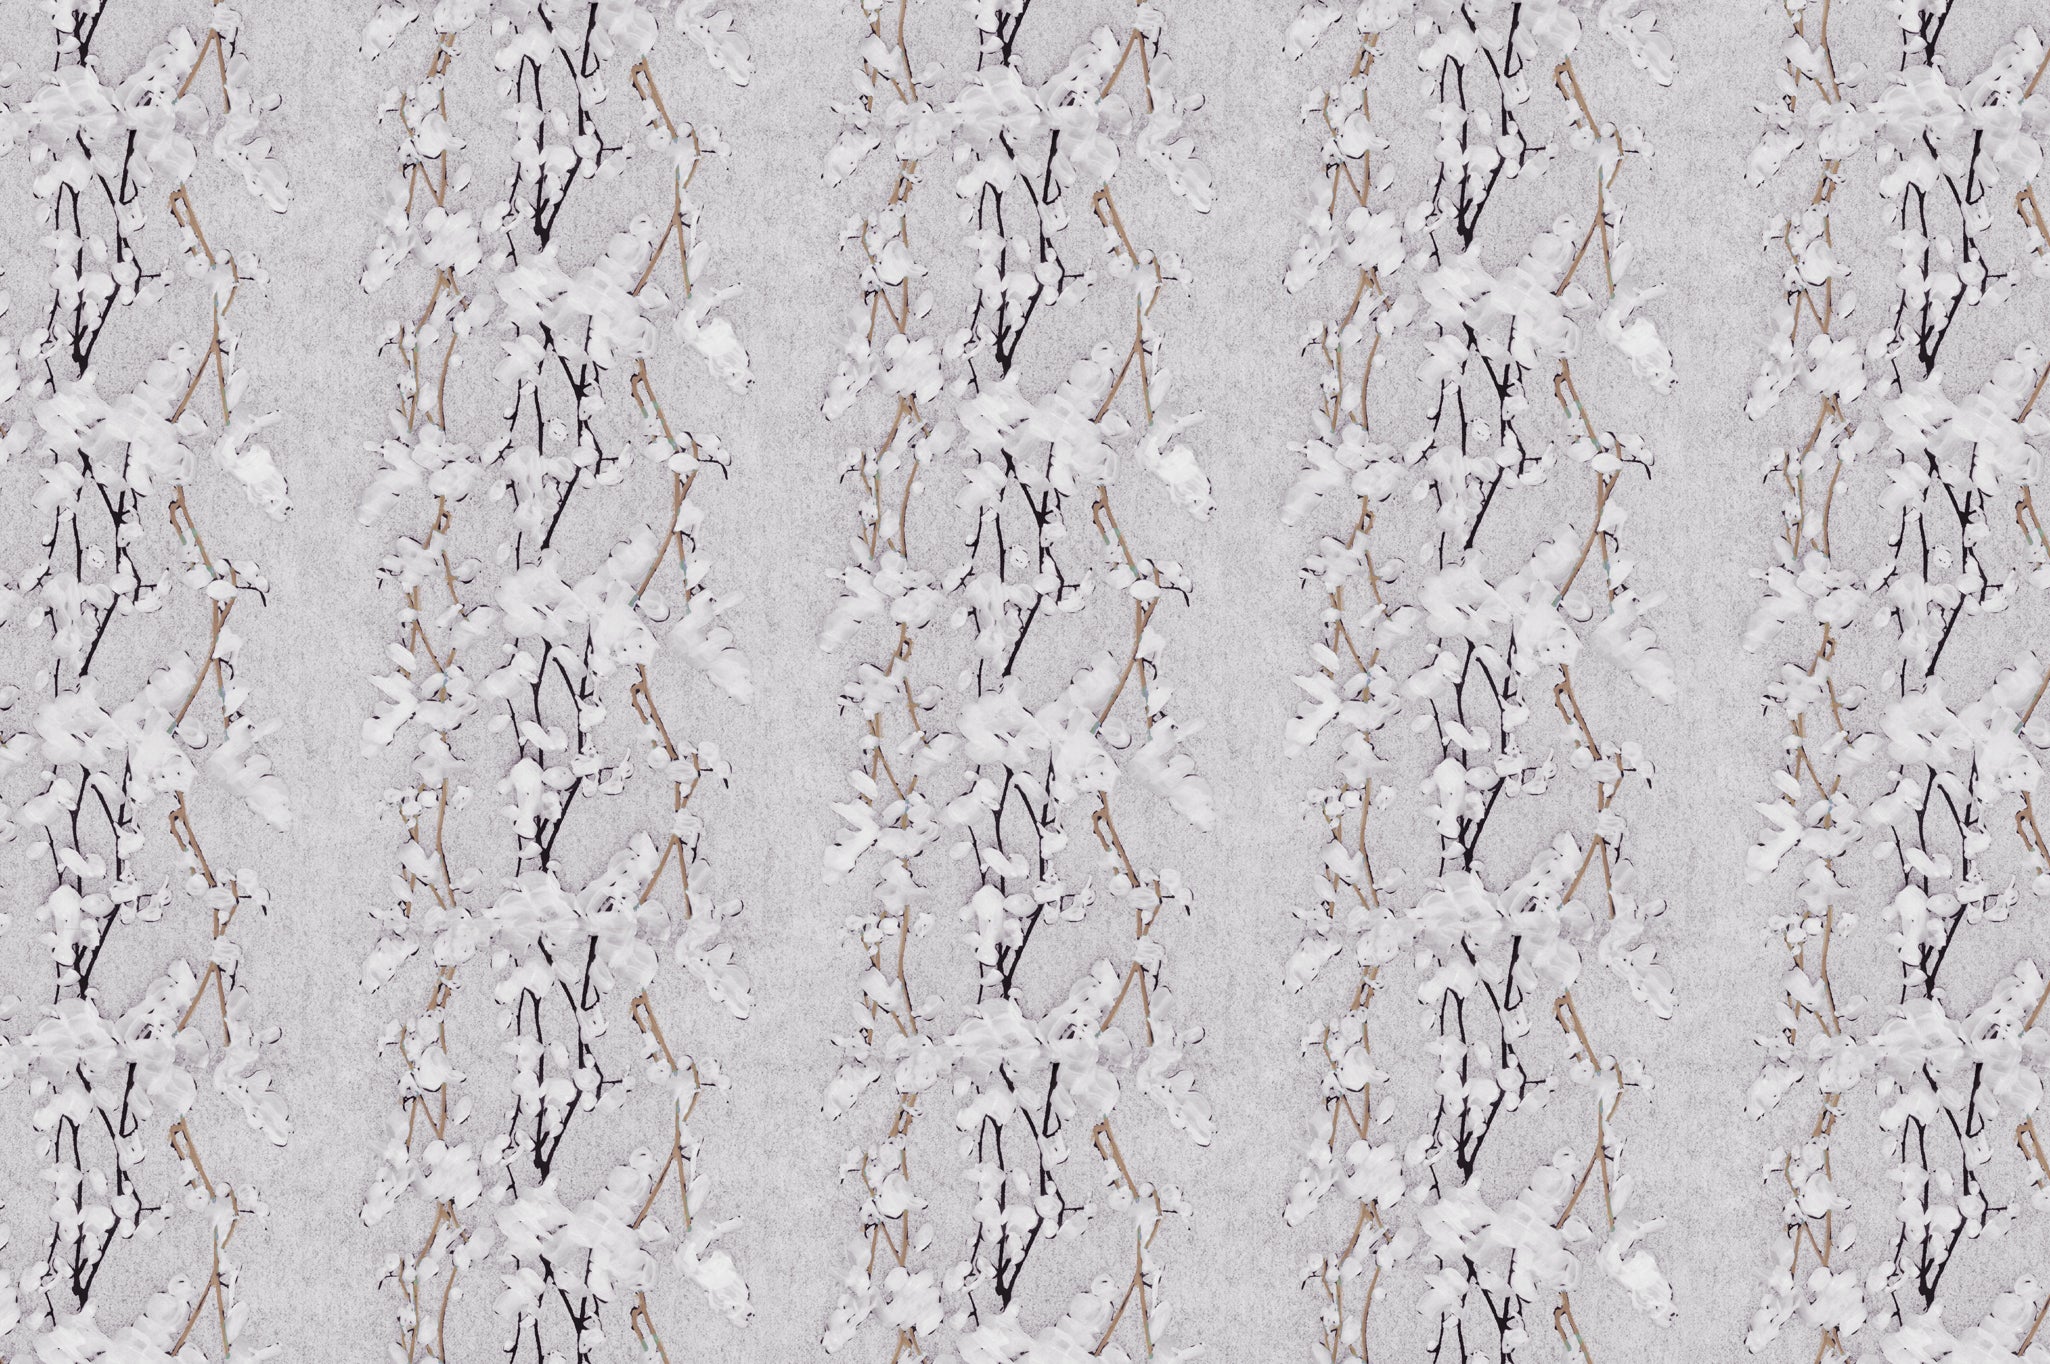 Detail of fabric in a striped wisteria print in shades of white and brown on a light gray field.